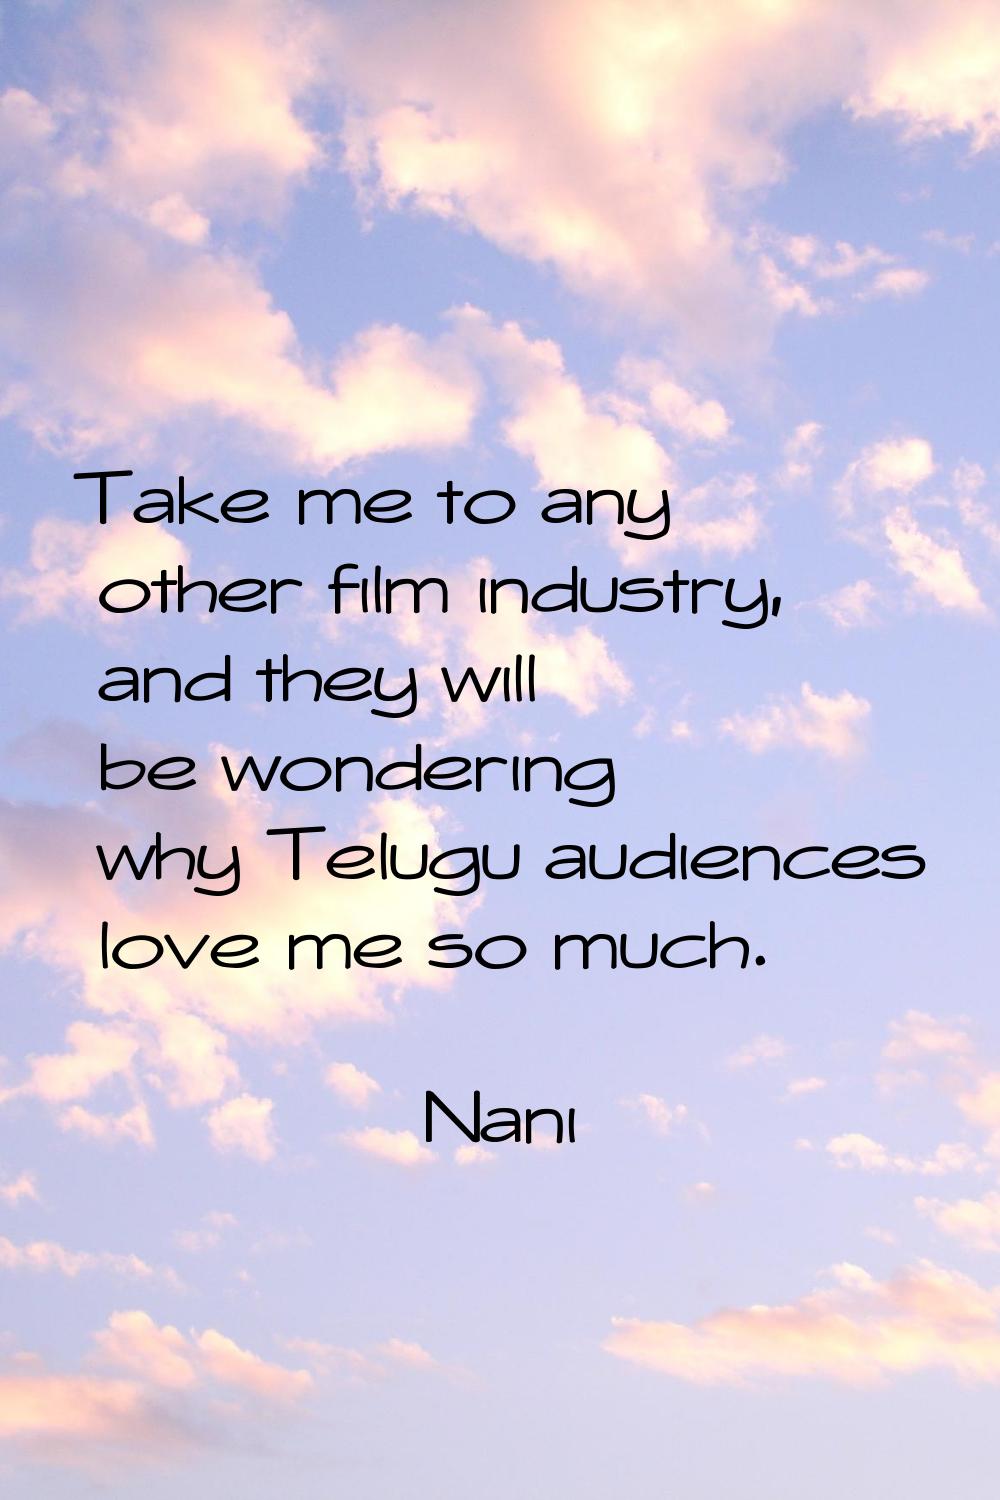 Take me to any other film industry, and they will be wondering why Telugu audiences love me so much